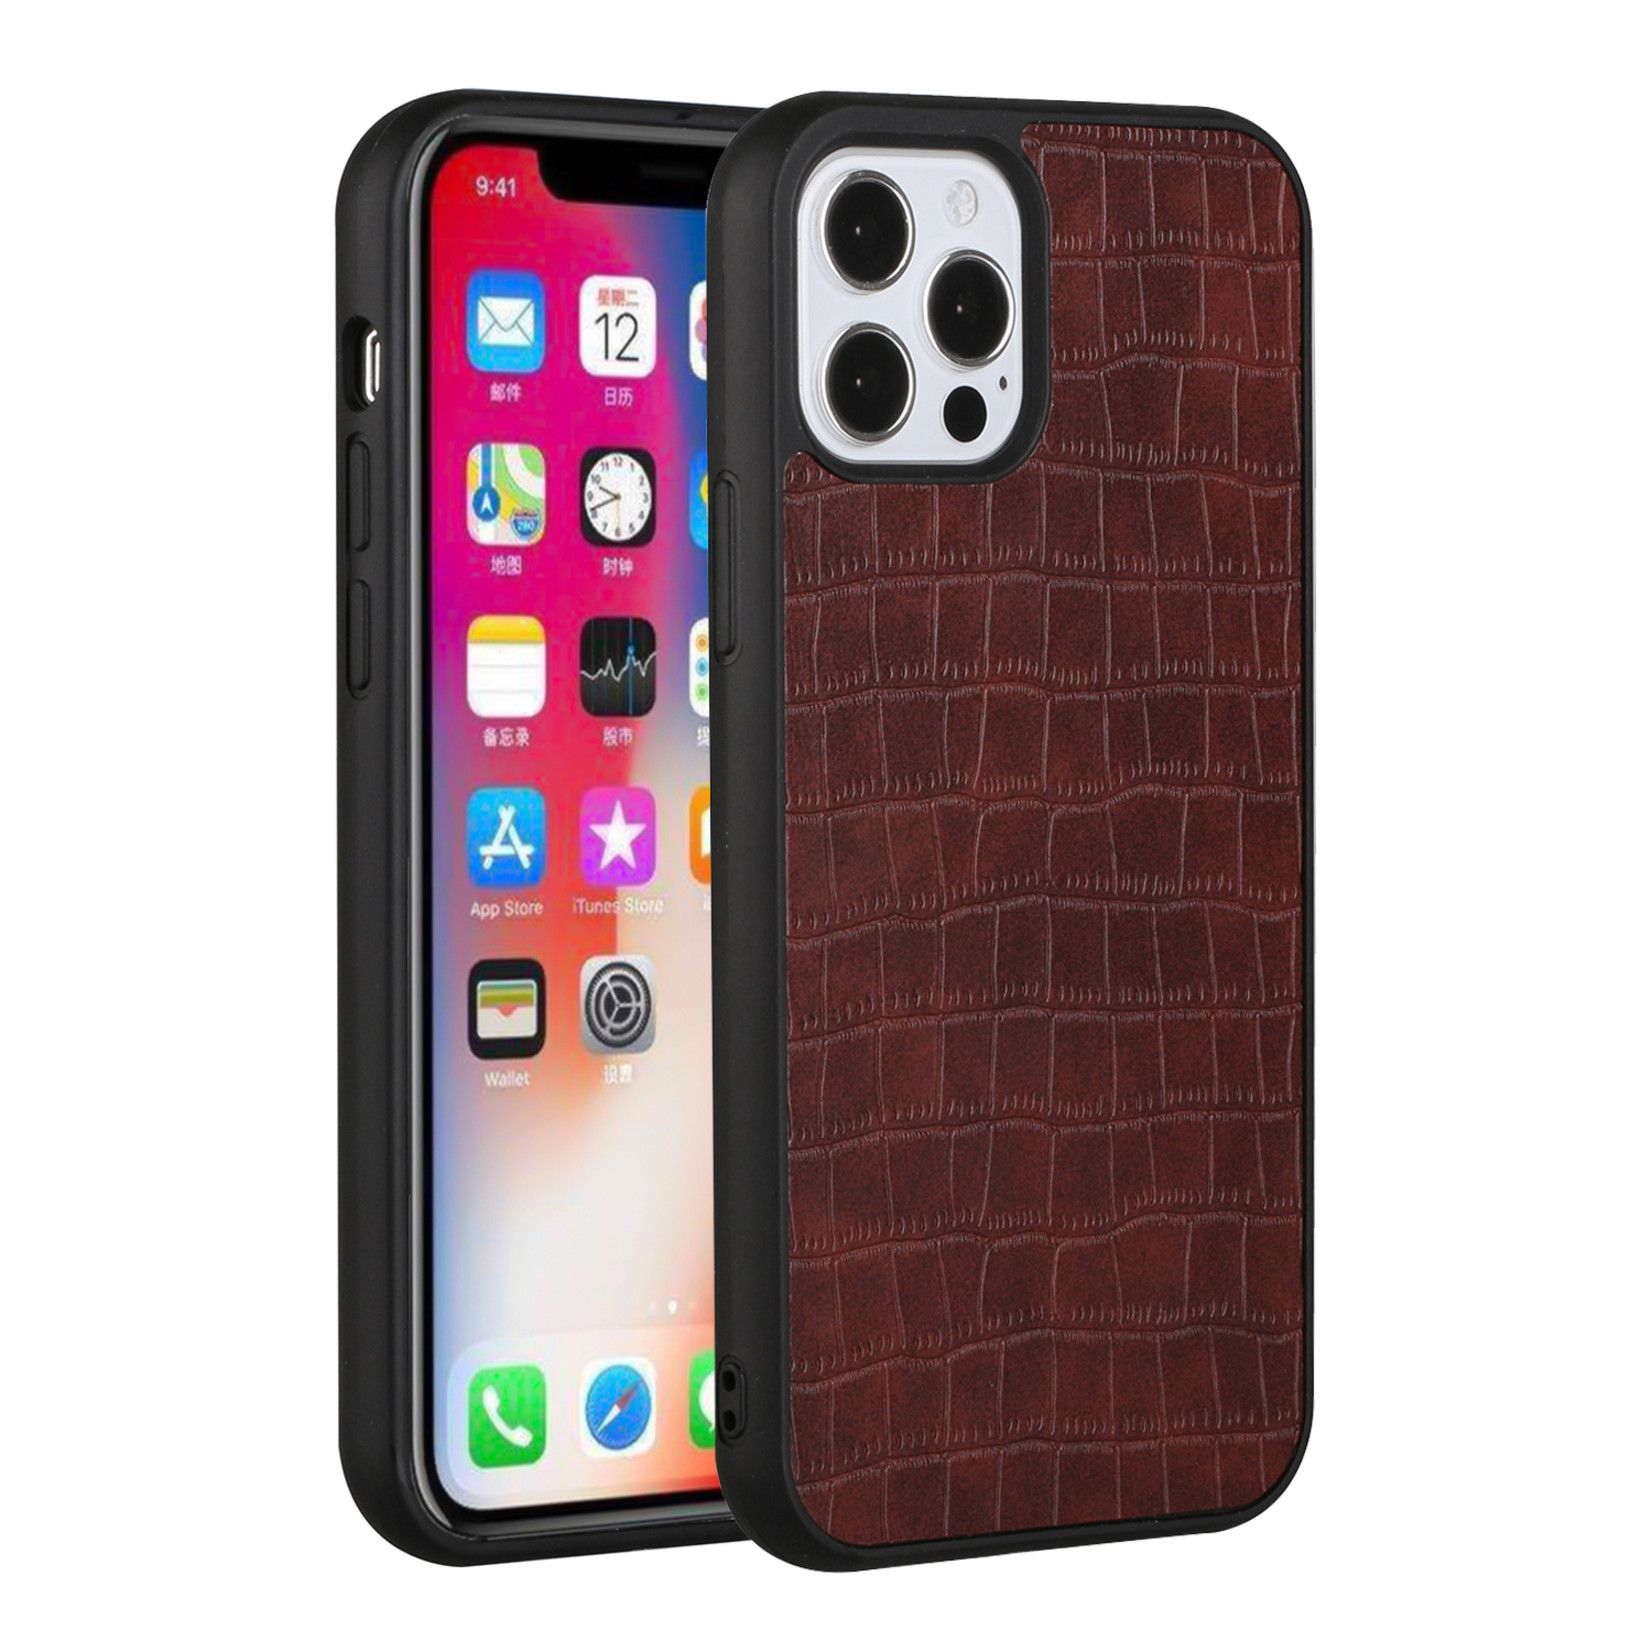 Hard PU Leather Croc Design Hybrid Case Cover - Brown For Apple iPhone 11 (XI6.1)